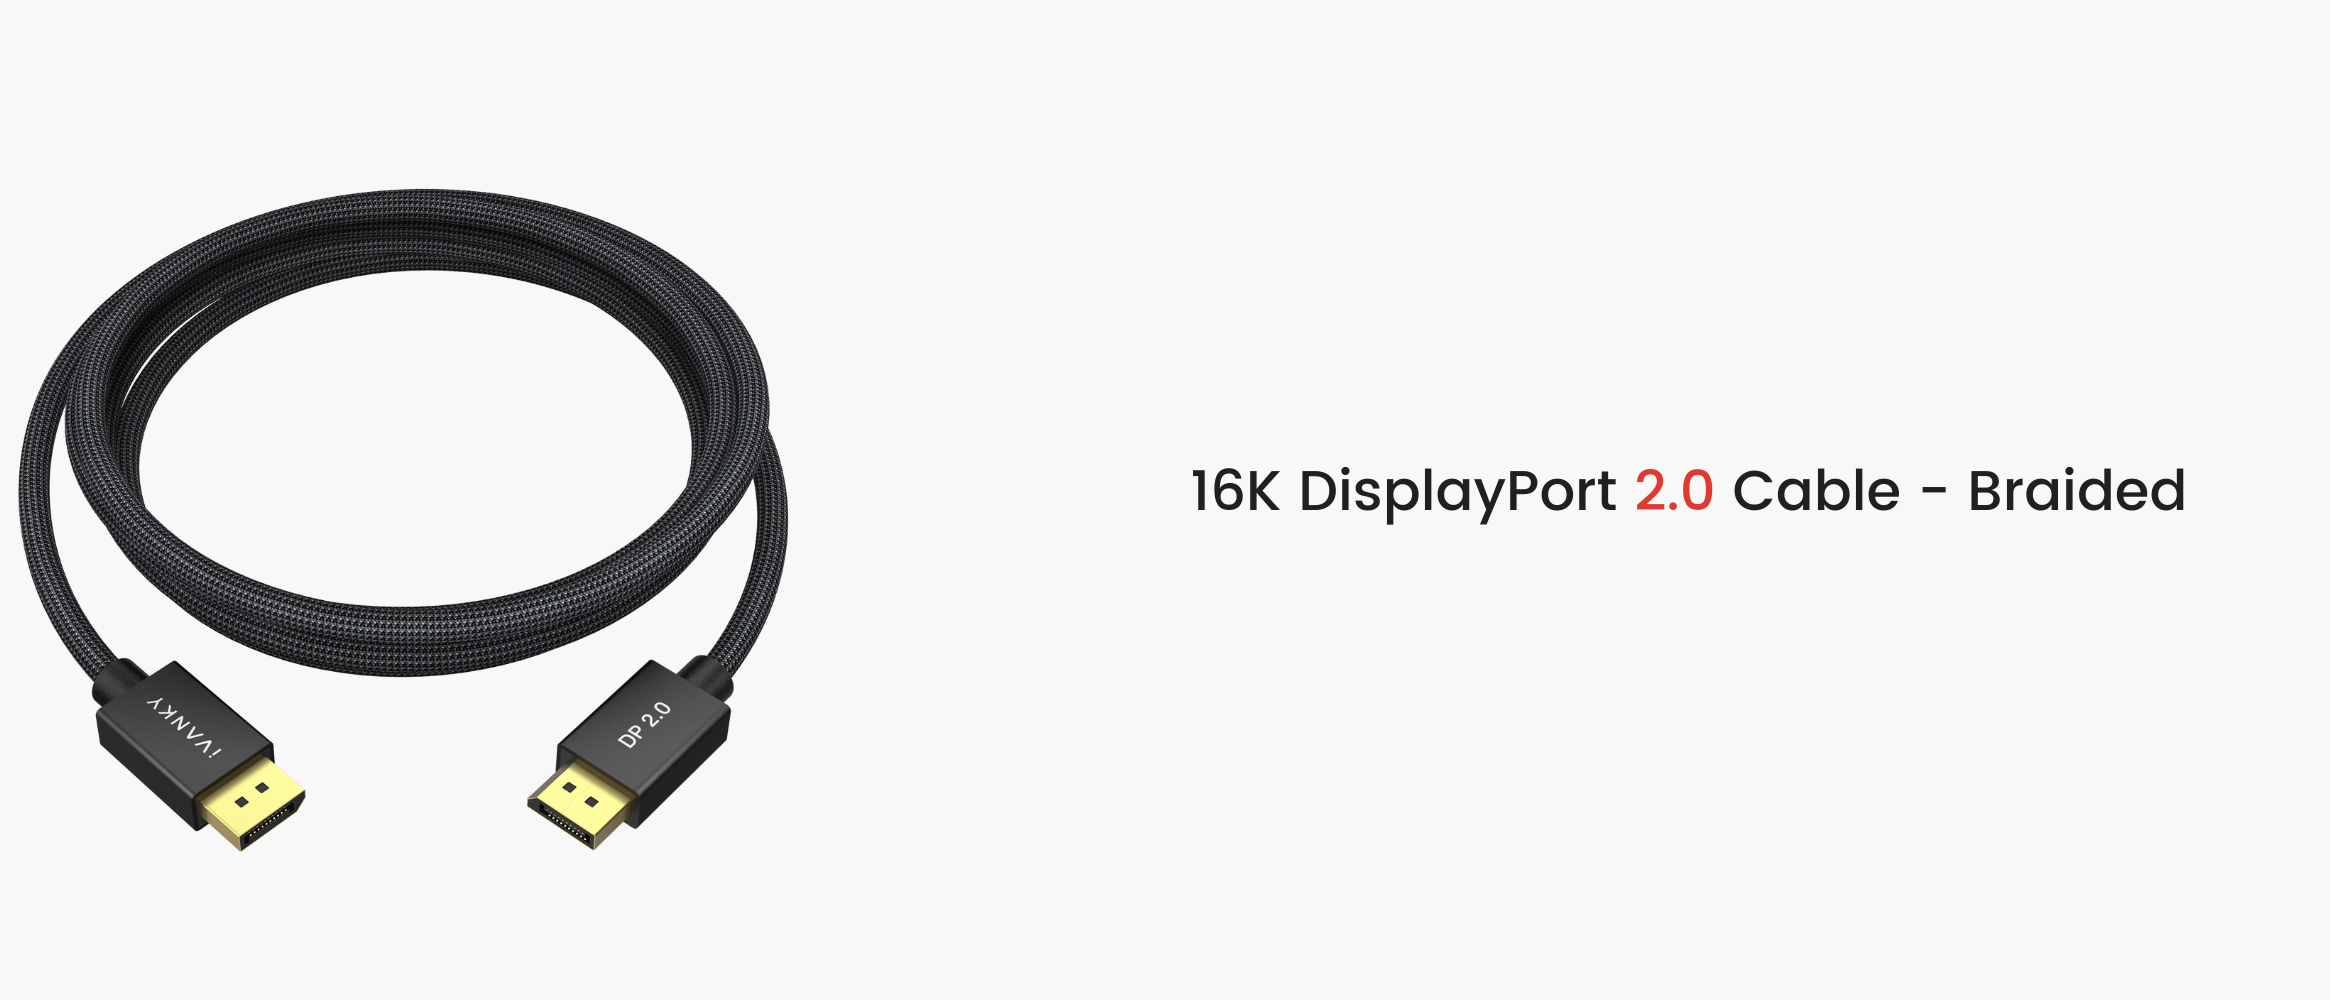 What is DisplayPort 2.0, and when will it be available? – iVANKY